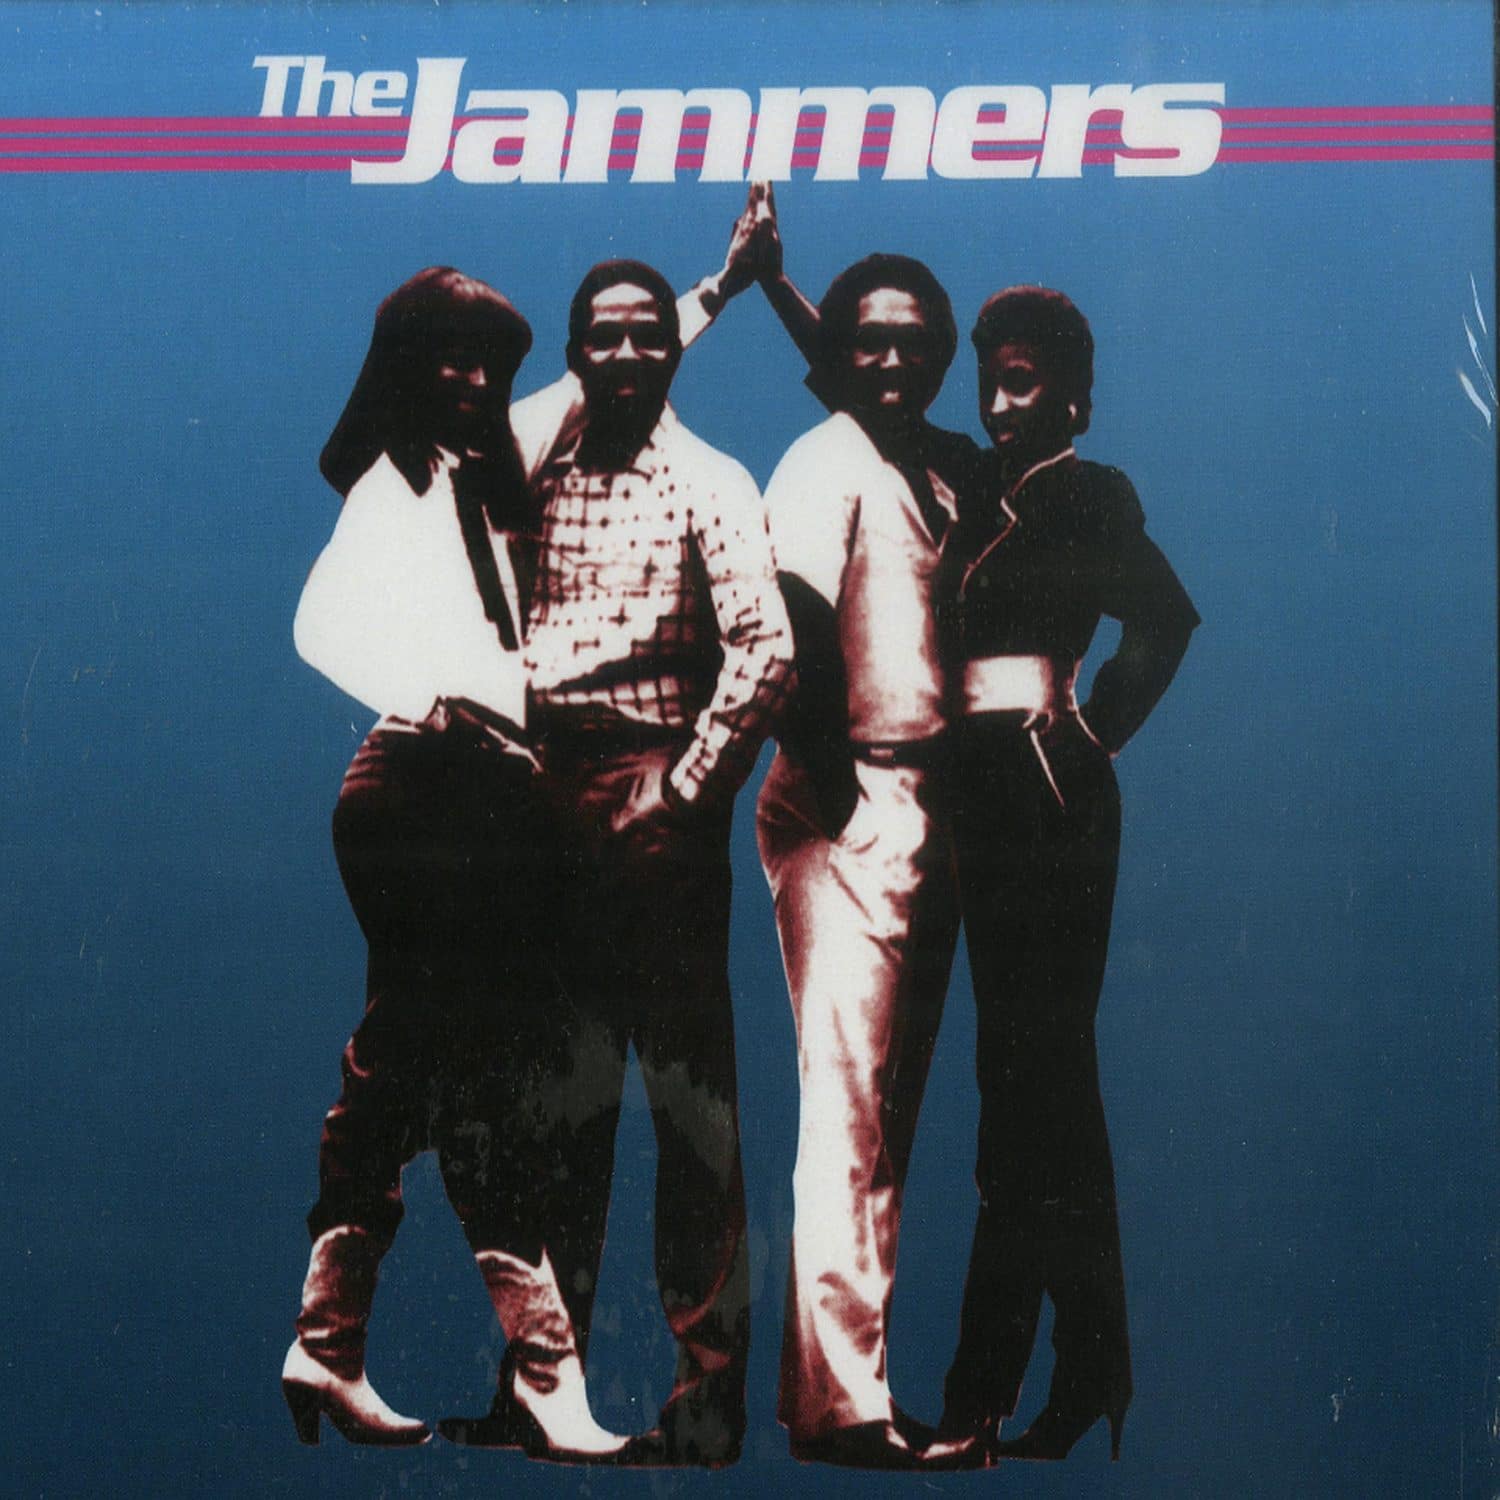 The Jammers - THE JAMMERS 